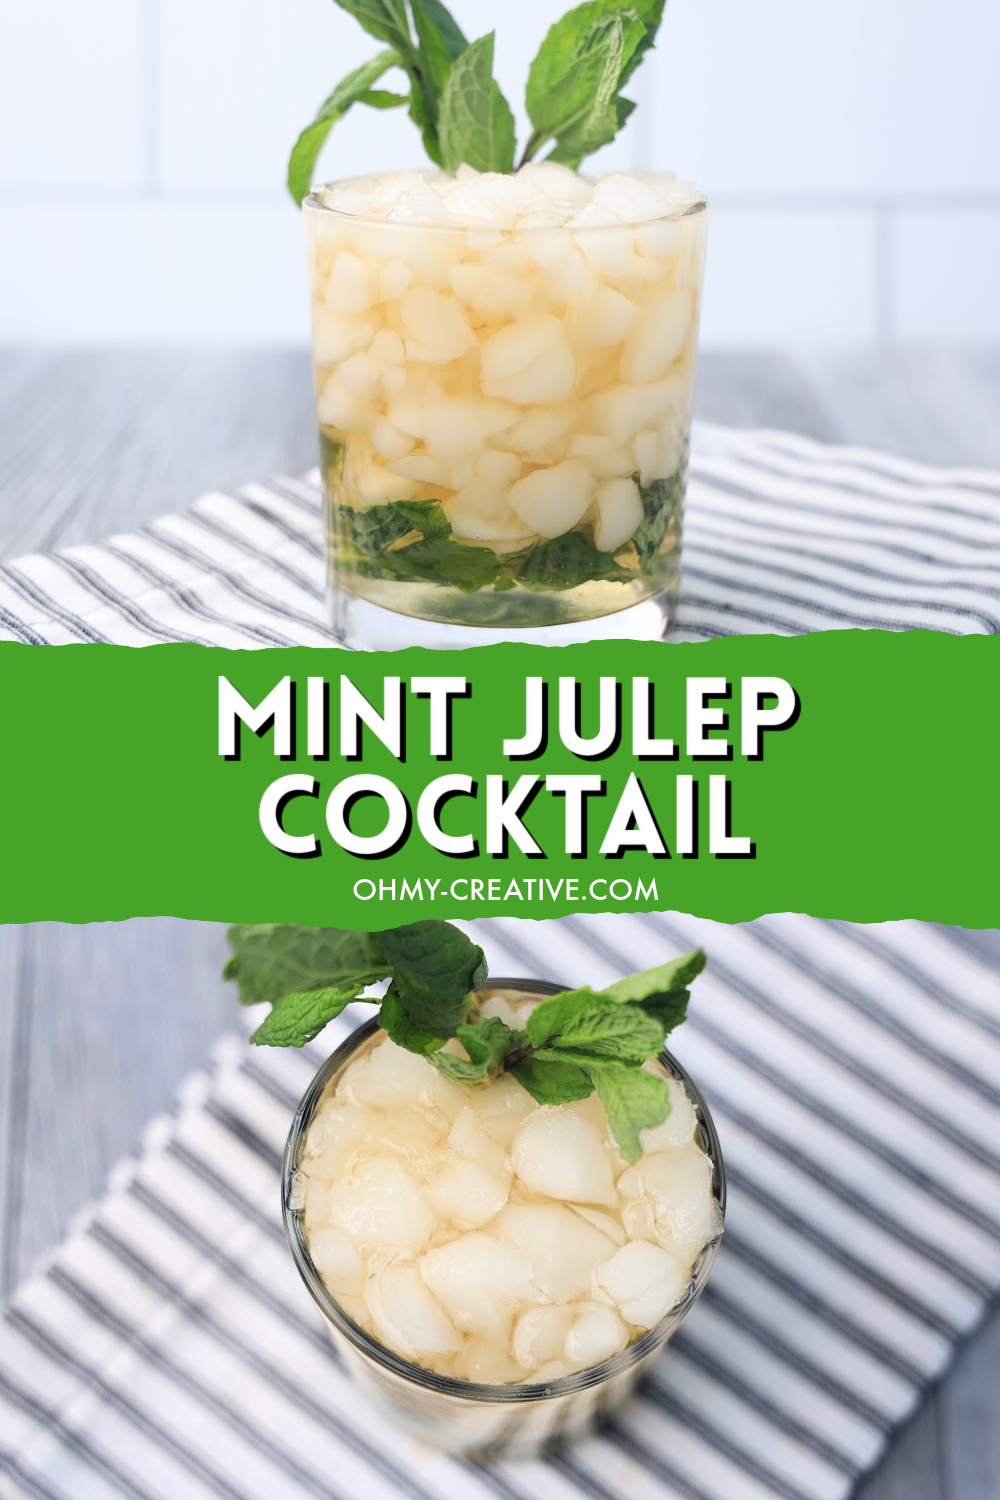 Two images of a 3 ingredient mint julep cocktail made with Kentucky bourbon on a striped napkin garnished with mint.